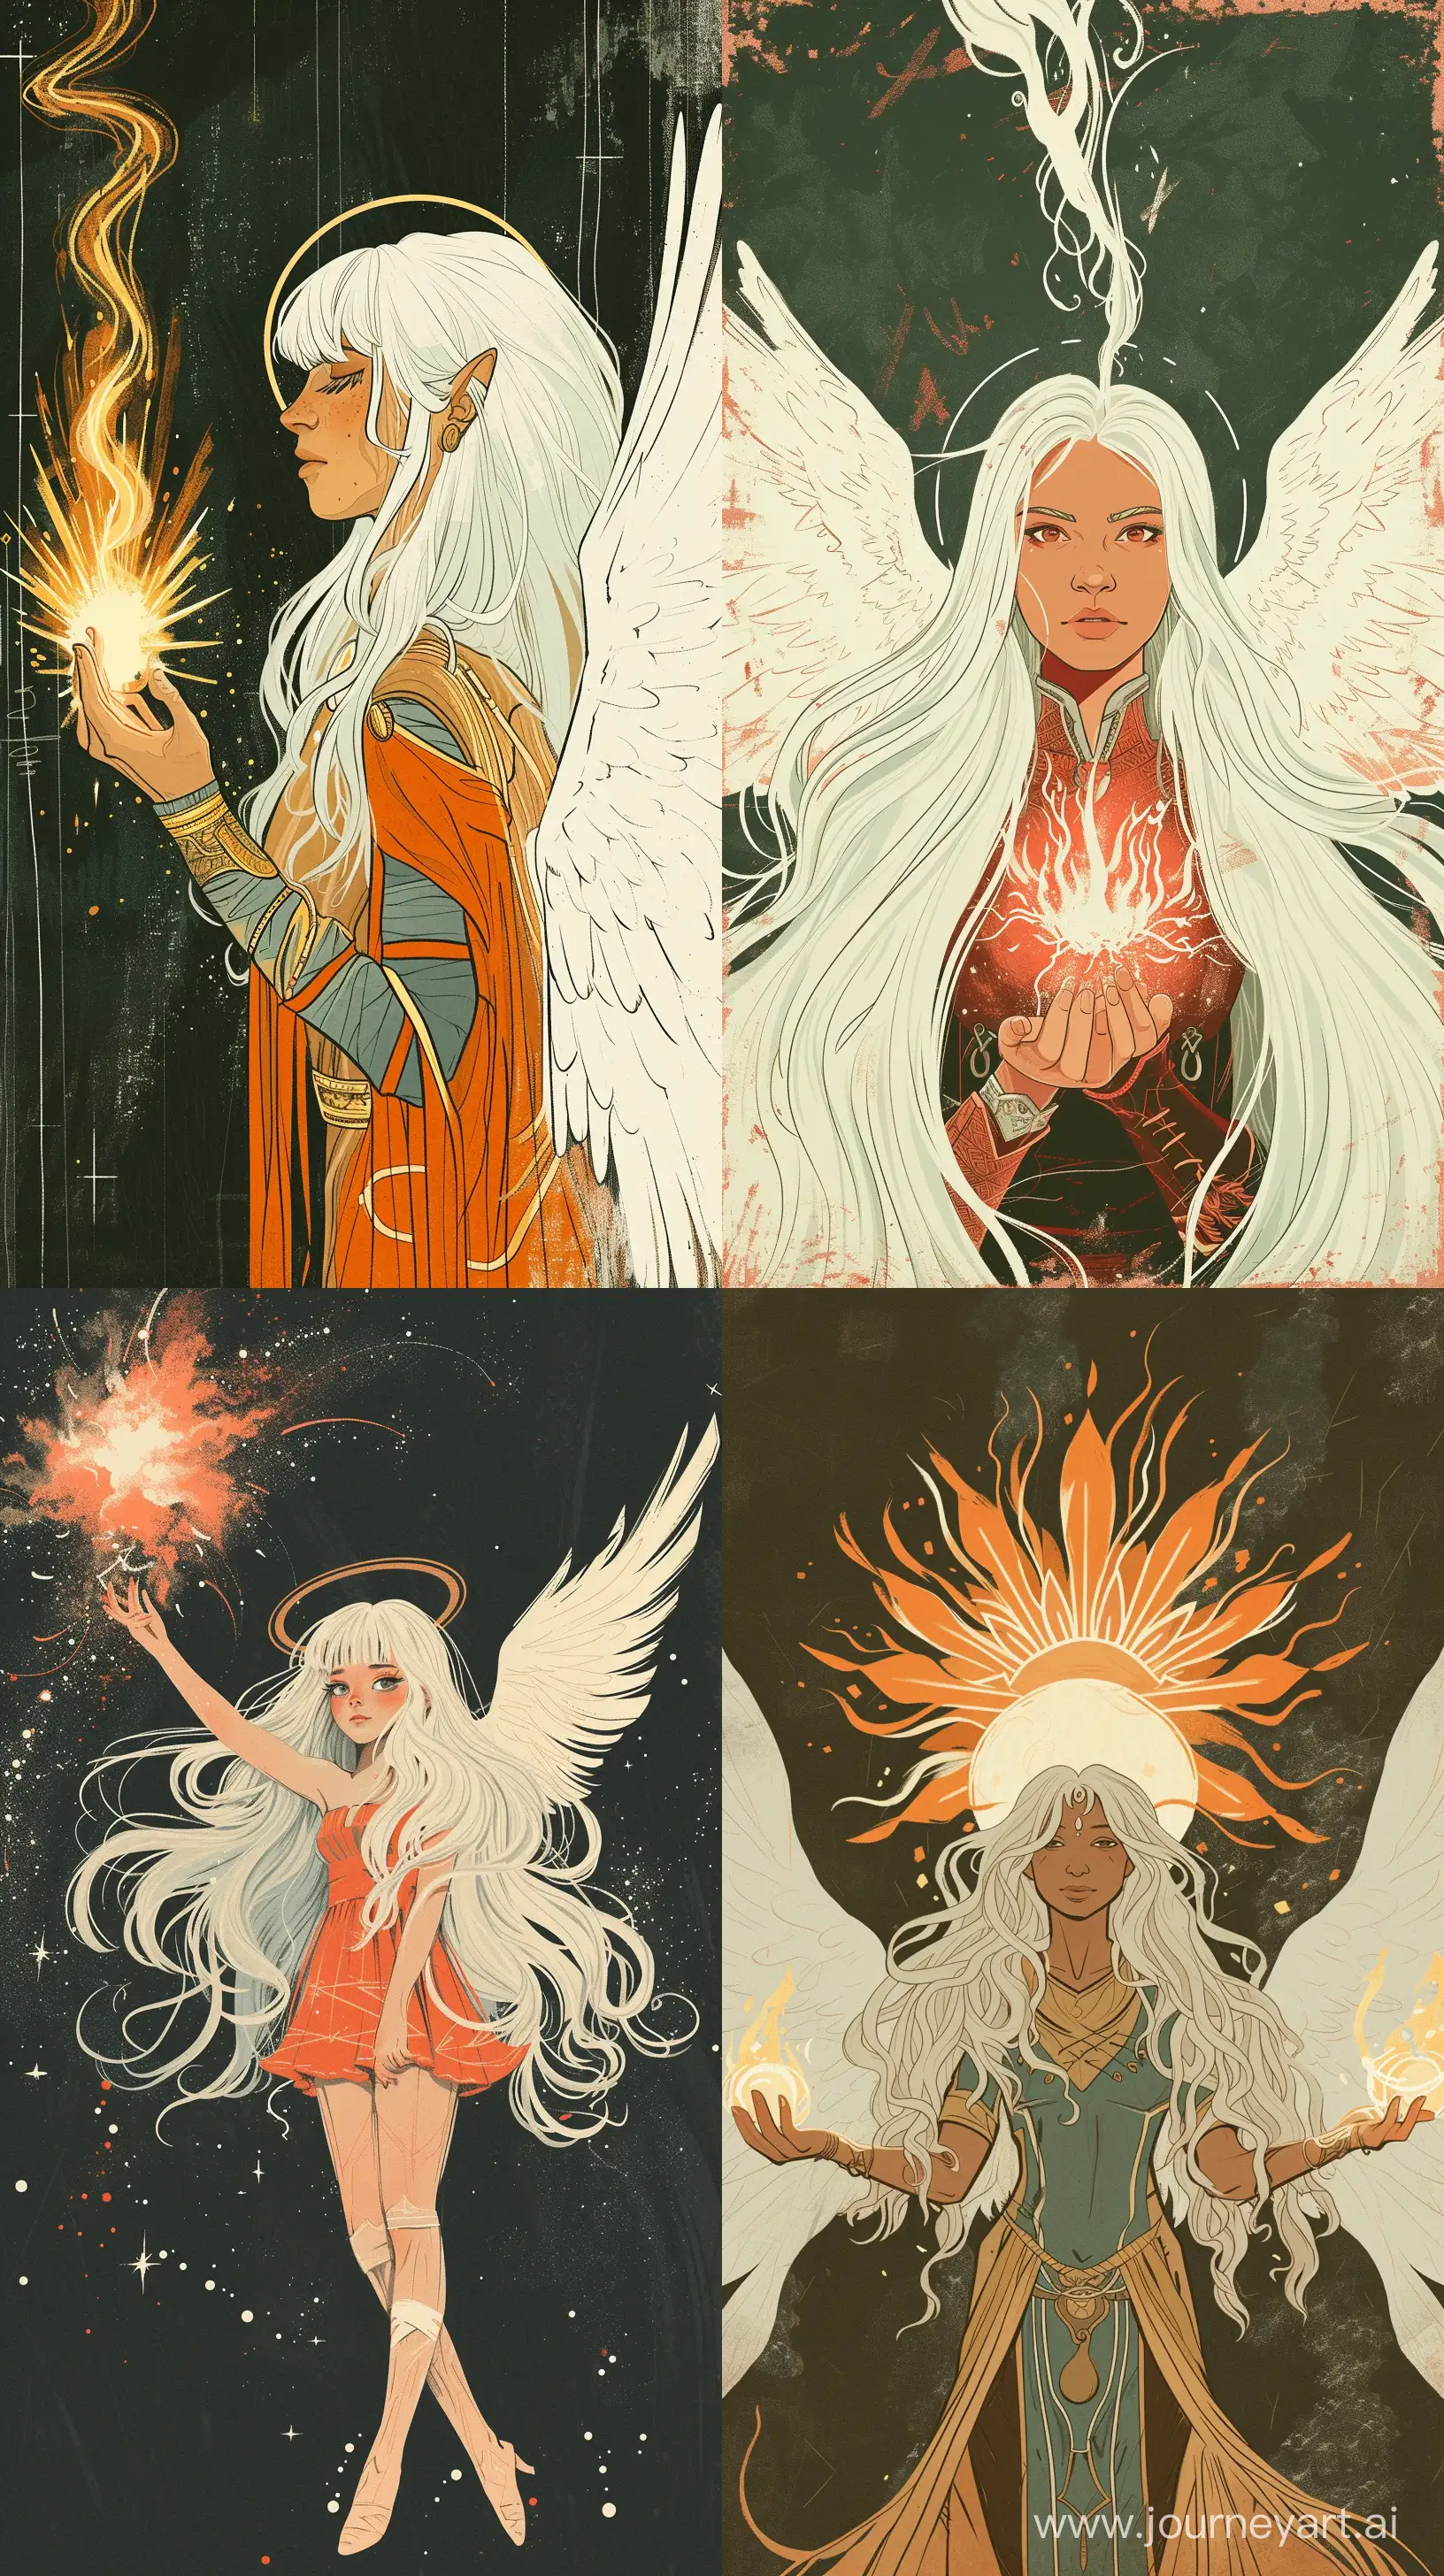 1970's dark fantasy book cover paper art dungeons and dragons style drawing of 22 years old girl with long white hair, halo and white angel wings sorcerer casting spells with minimalist far perspective --ar 9:16